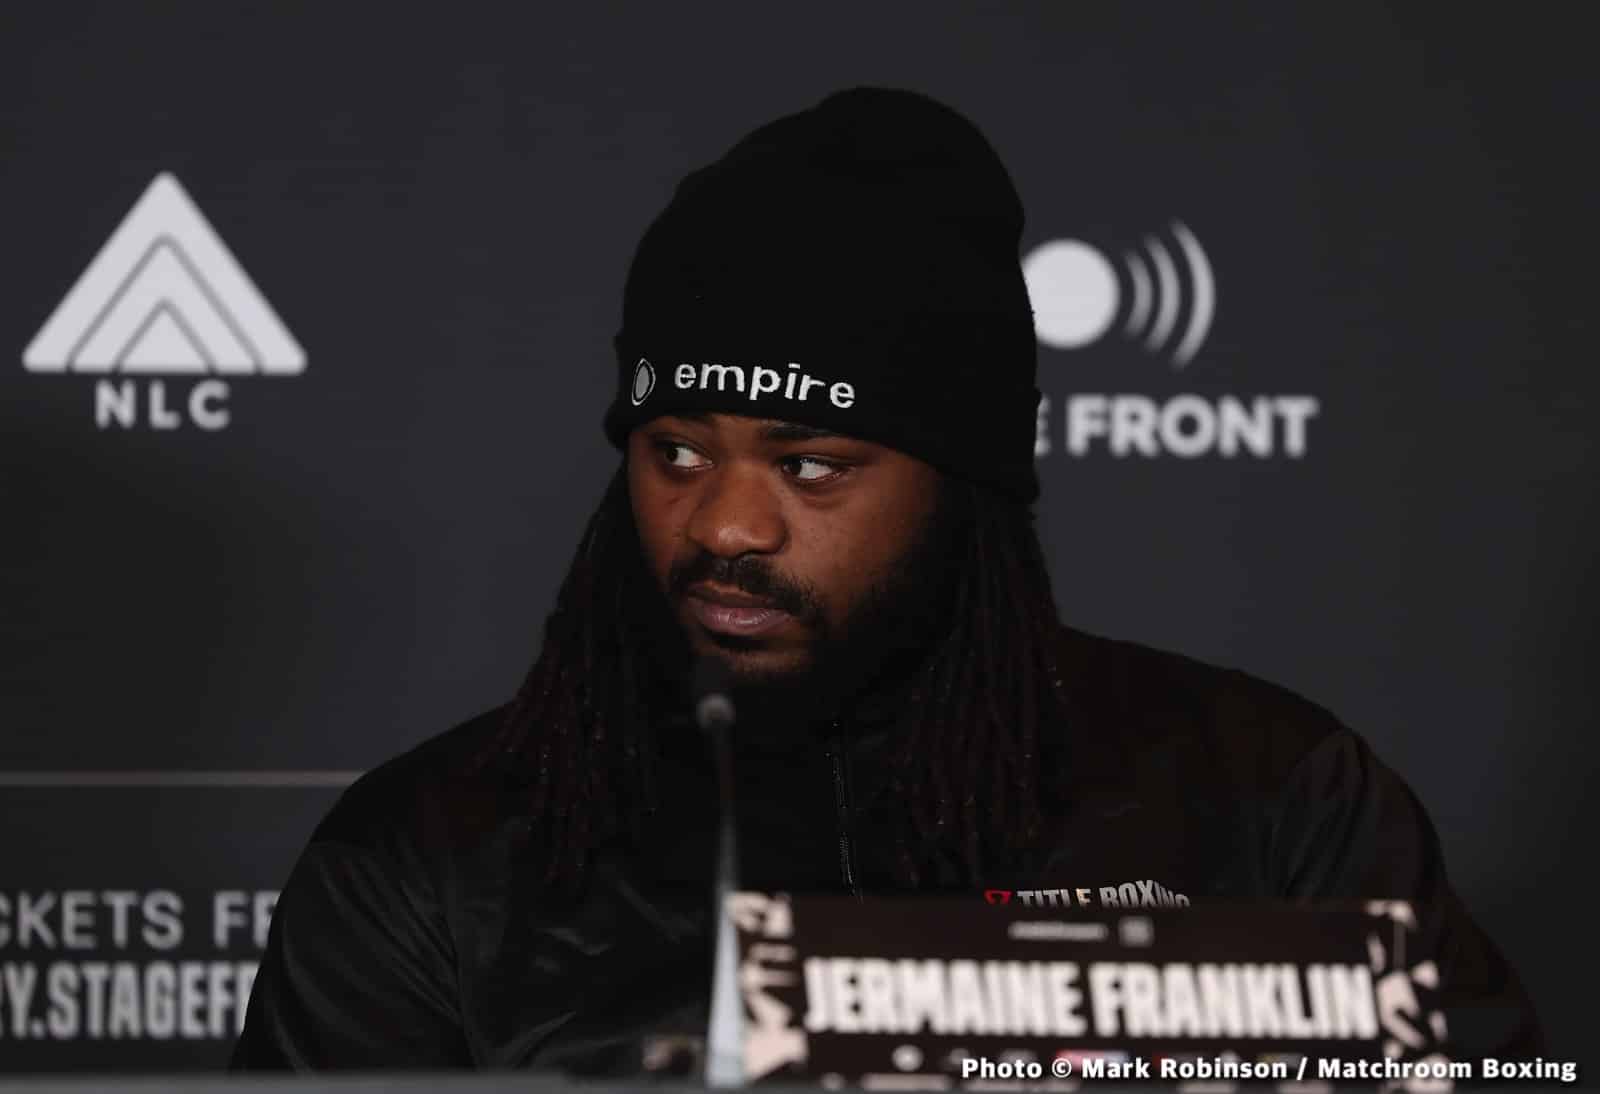 Jermaine Franklin believes he'll KO Dillian Whyte with any punch